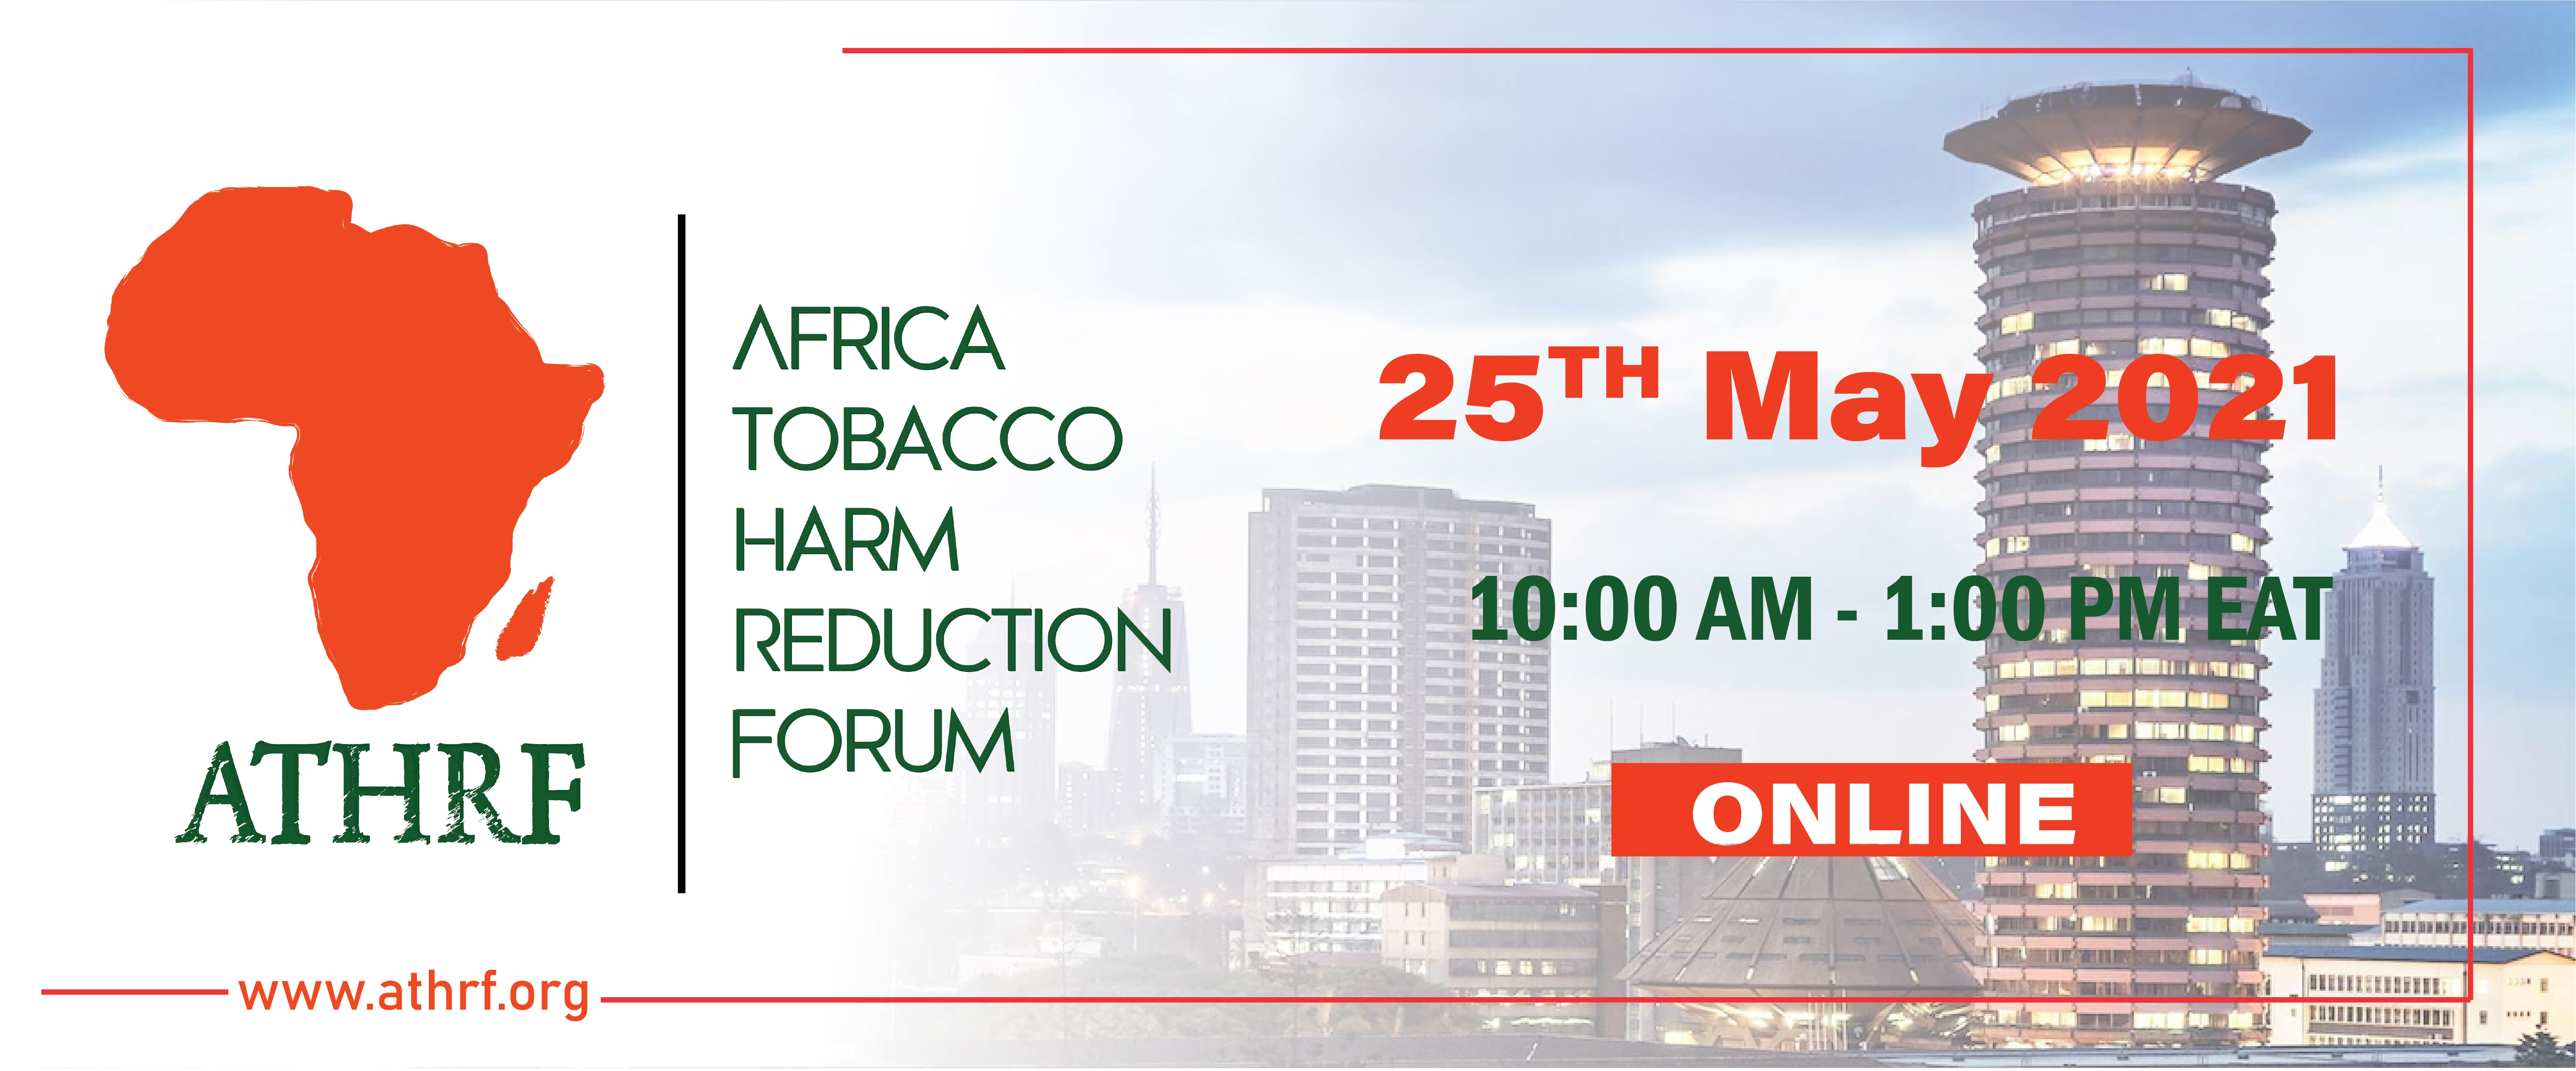 AFRICA TOBACCO HARM REDUCTION FORUM, 25TH MAY 2021